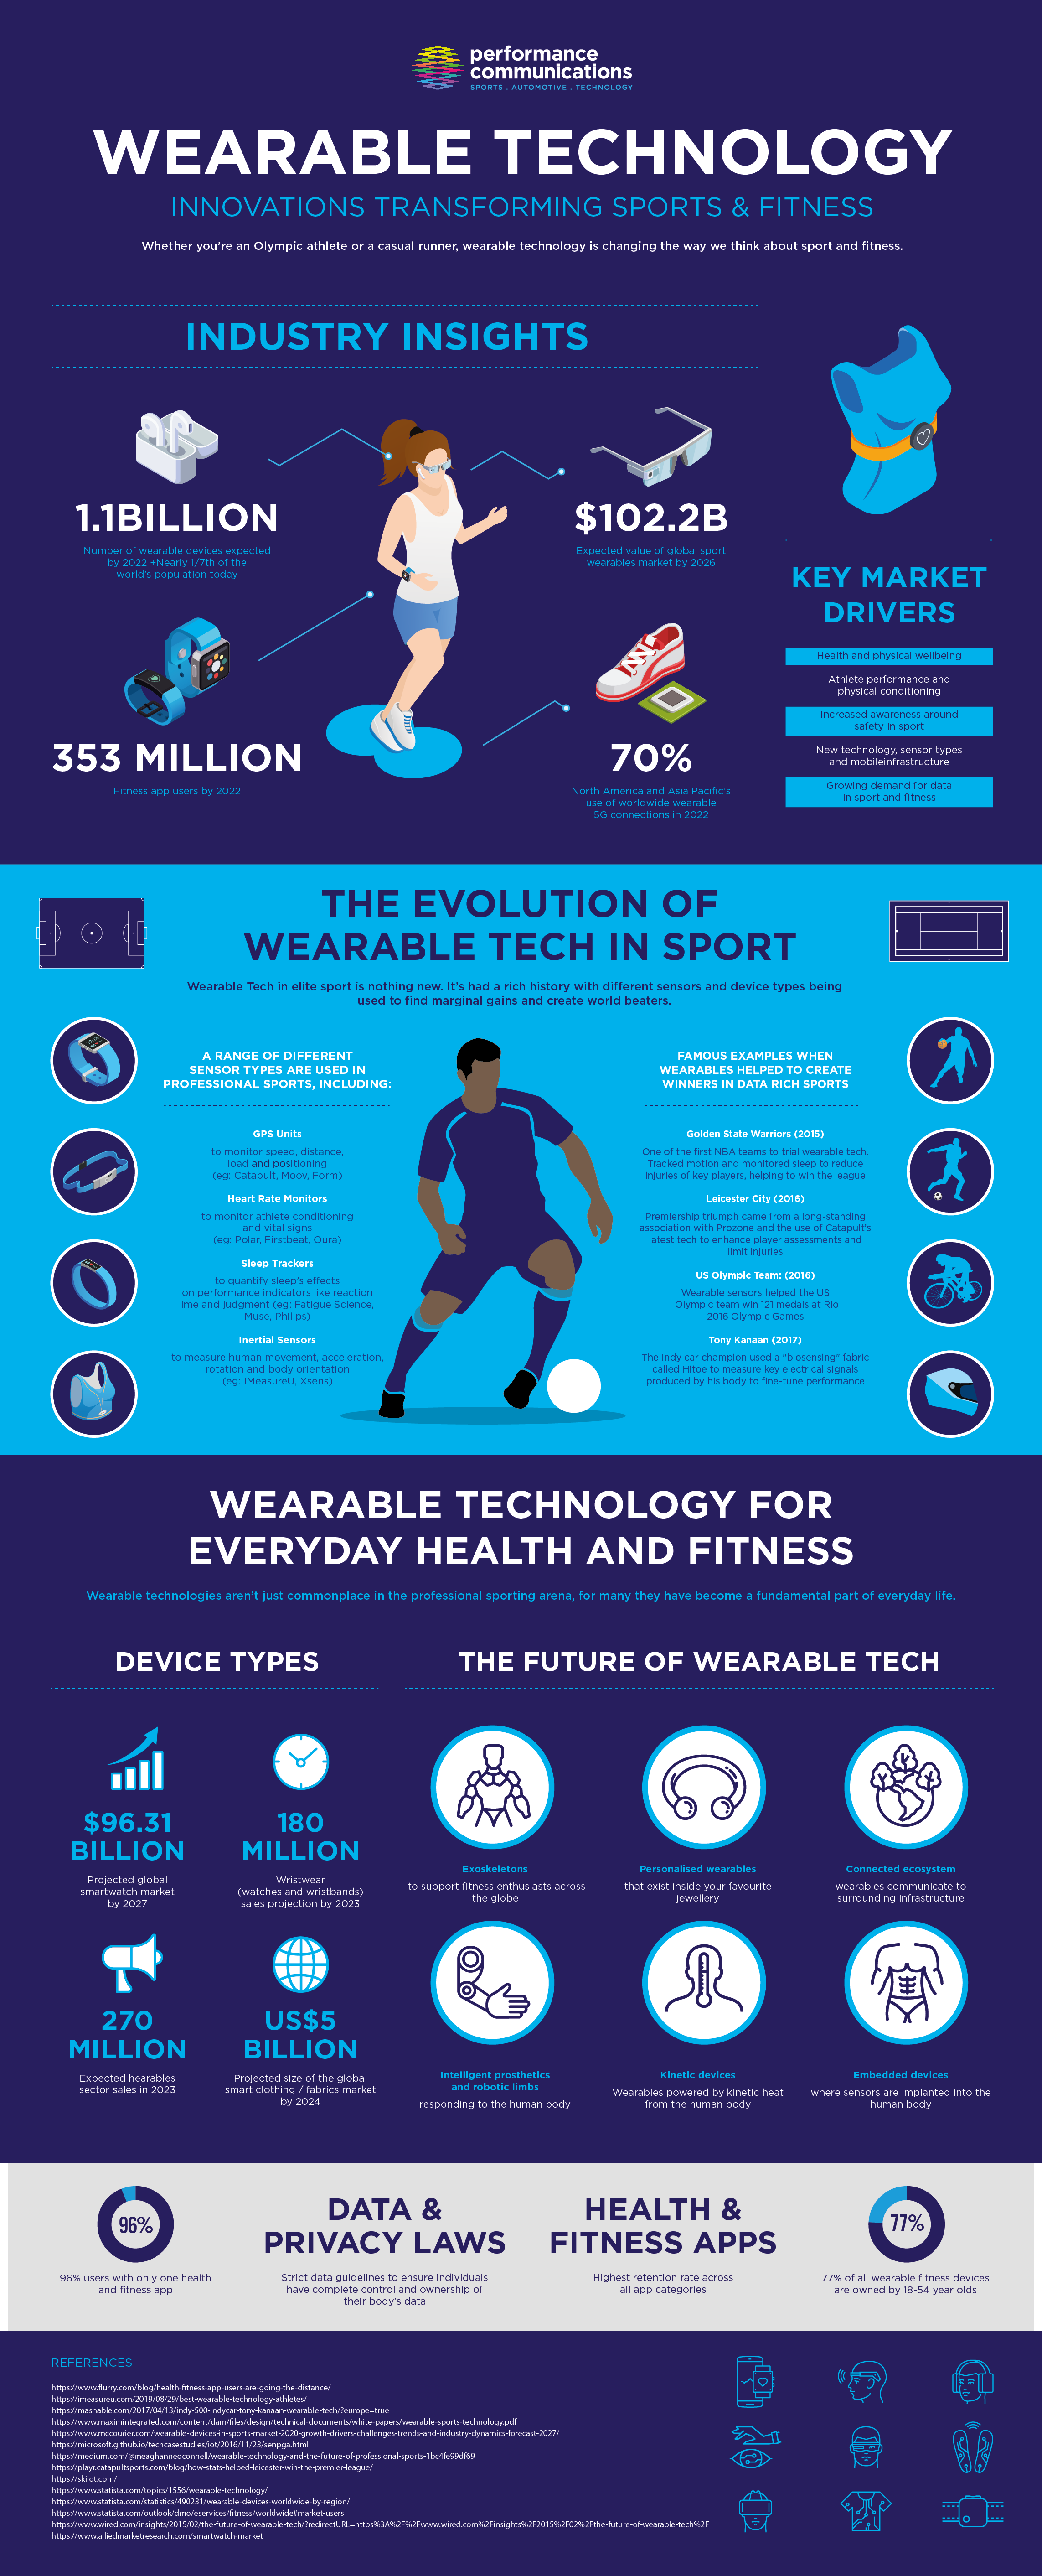 Wearable Technology In Sport and Fitness - Performance Communications